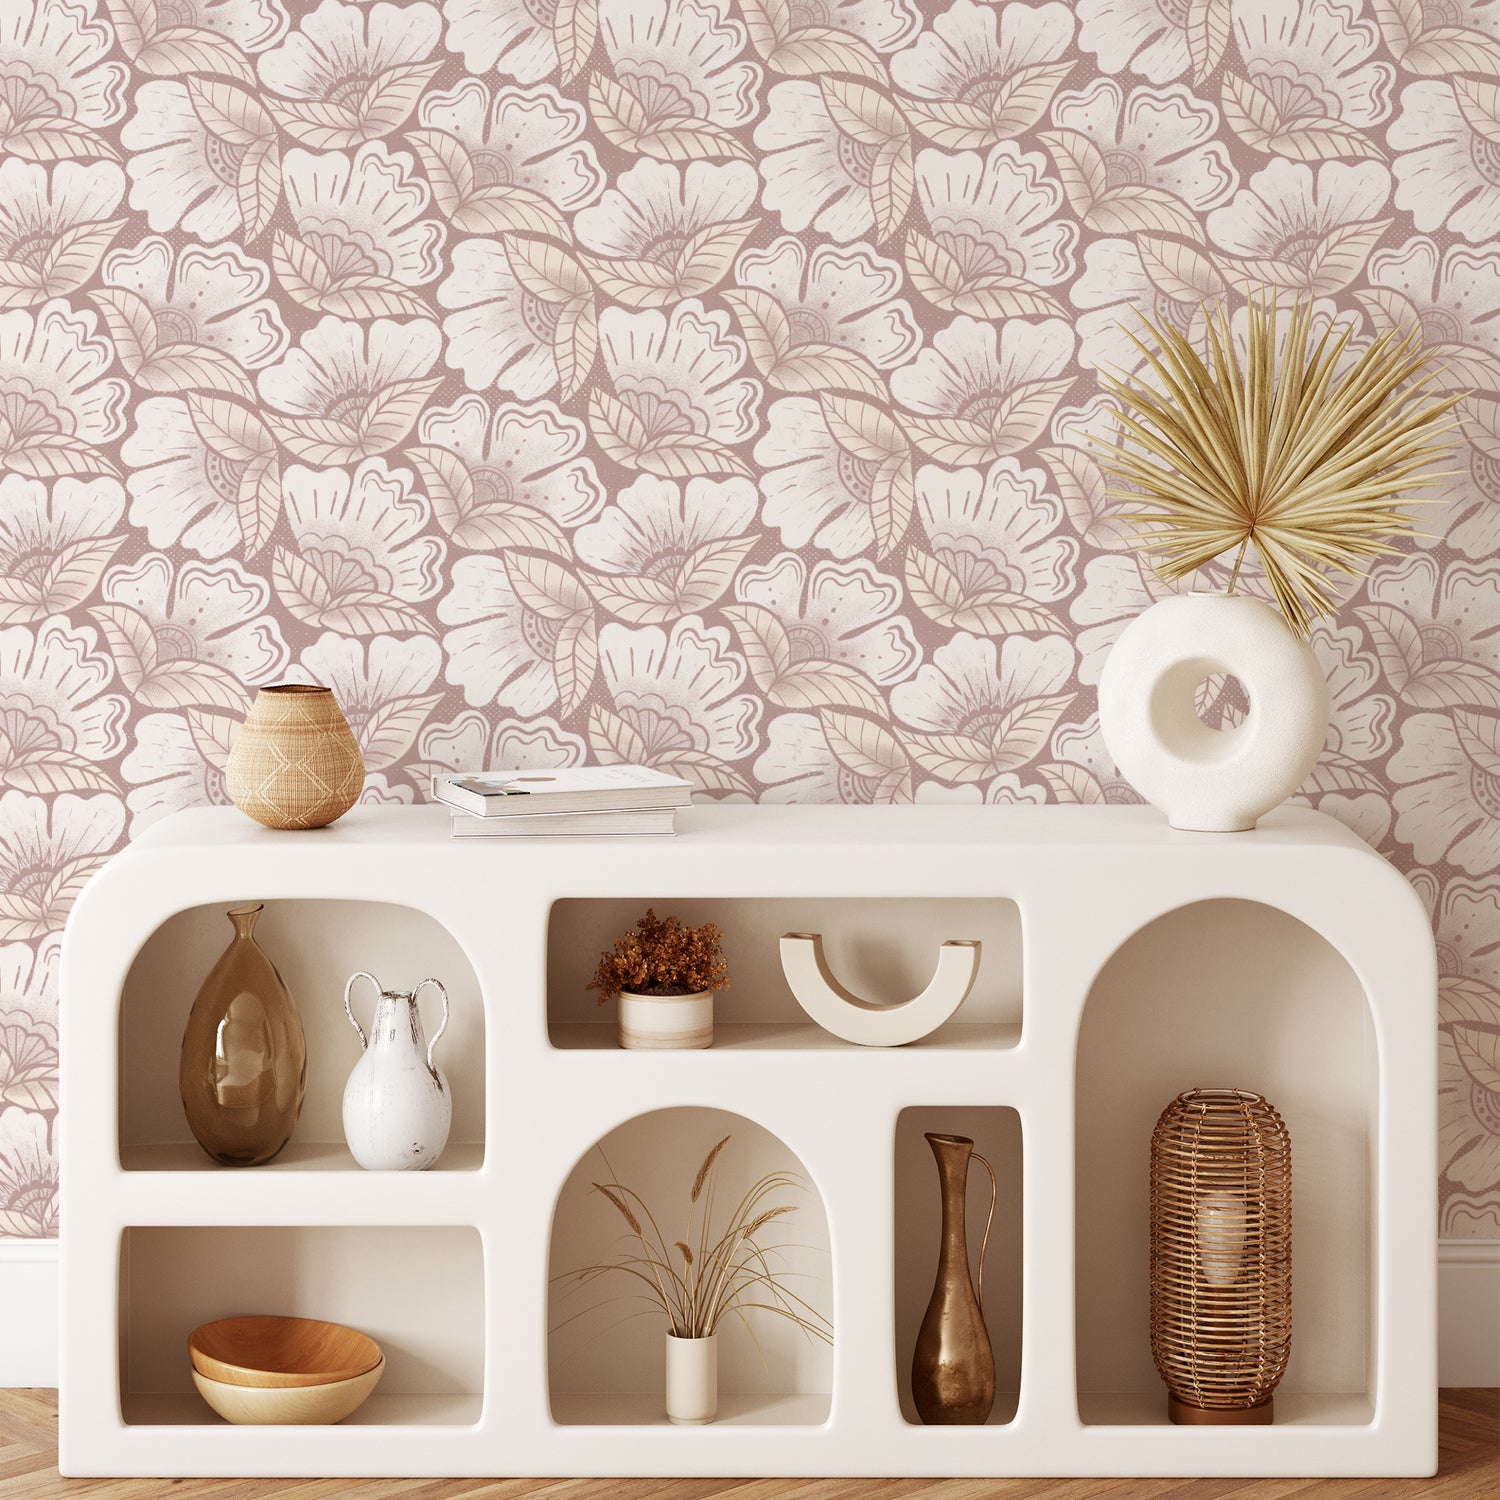 Scattered Flowers Wallpaper in Deep Mauve shown in a living room.